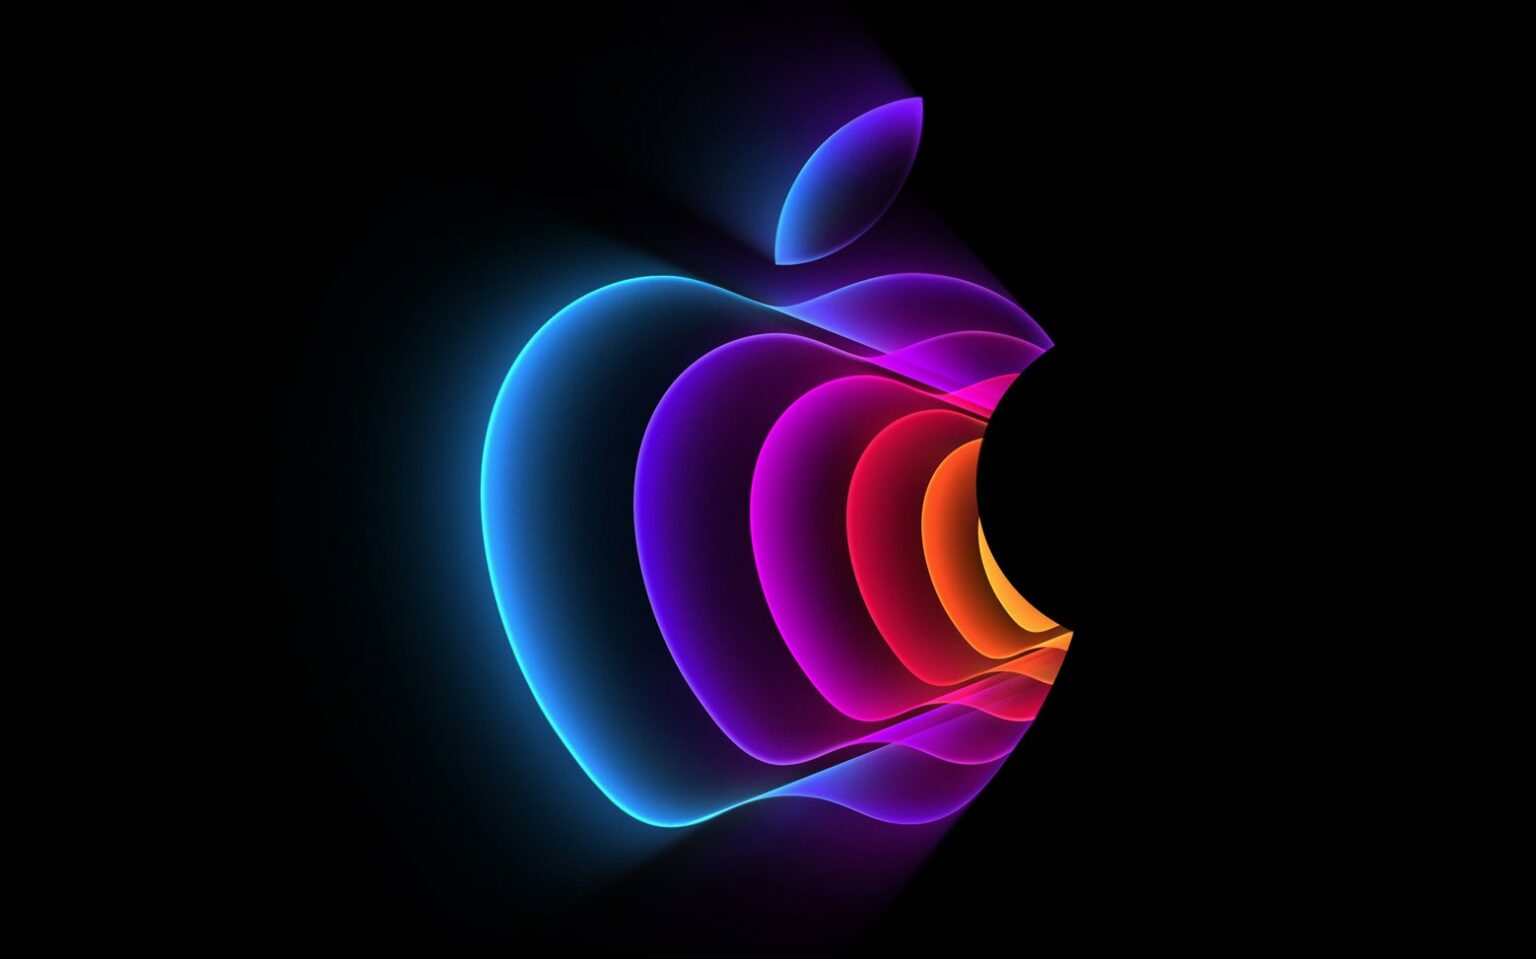 It's official: Apple 2022 spring event, dubbed 